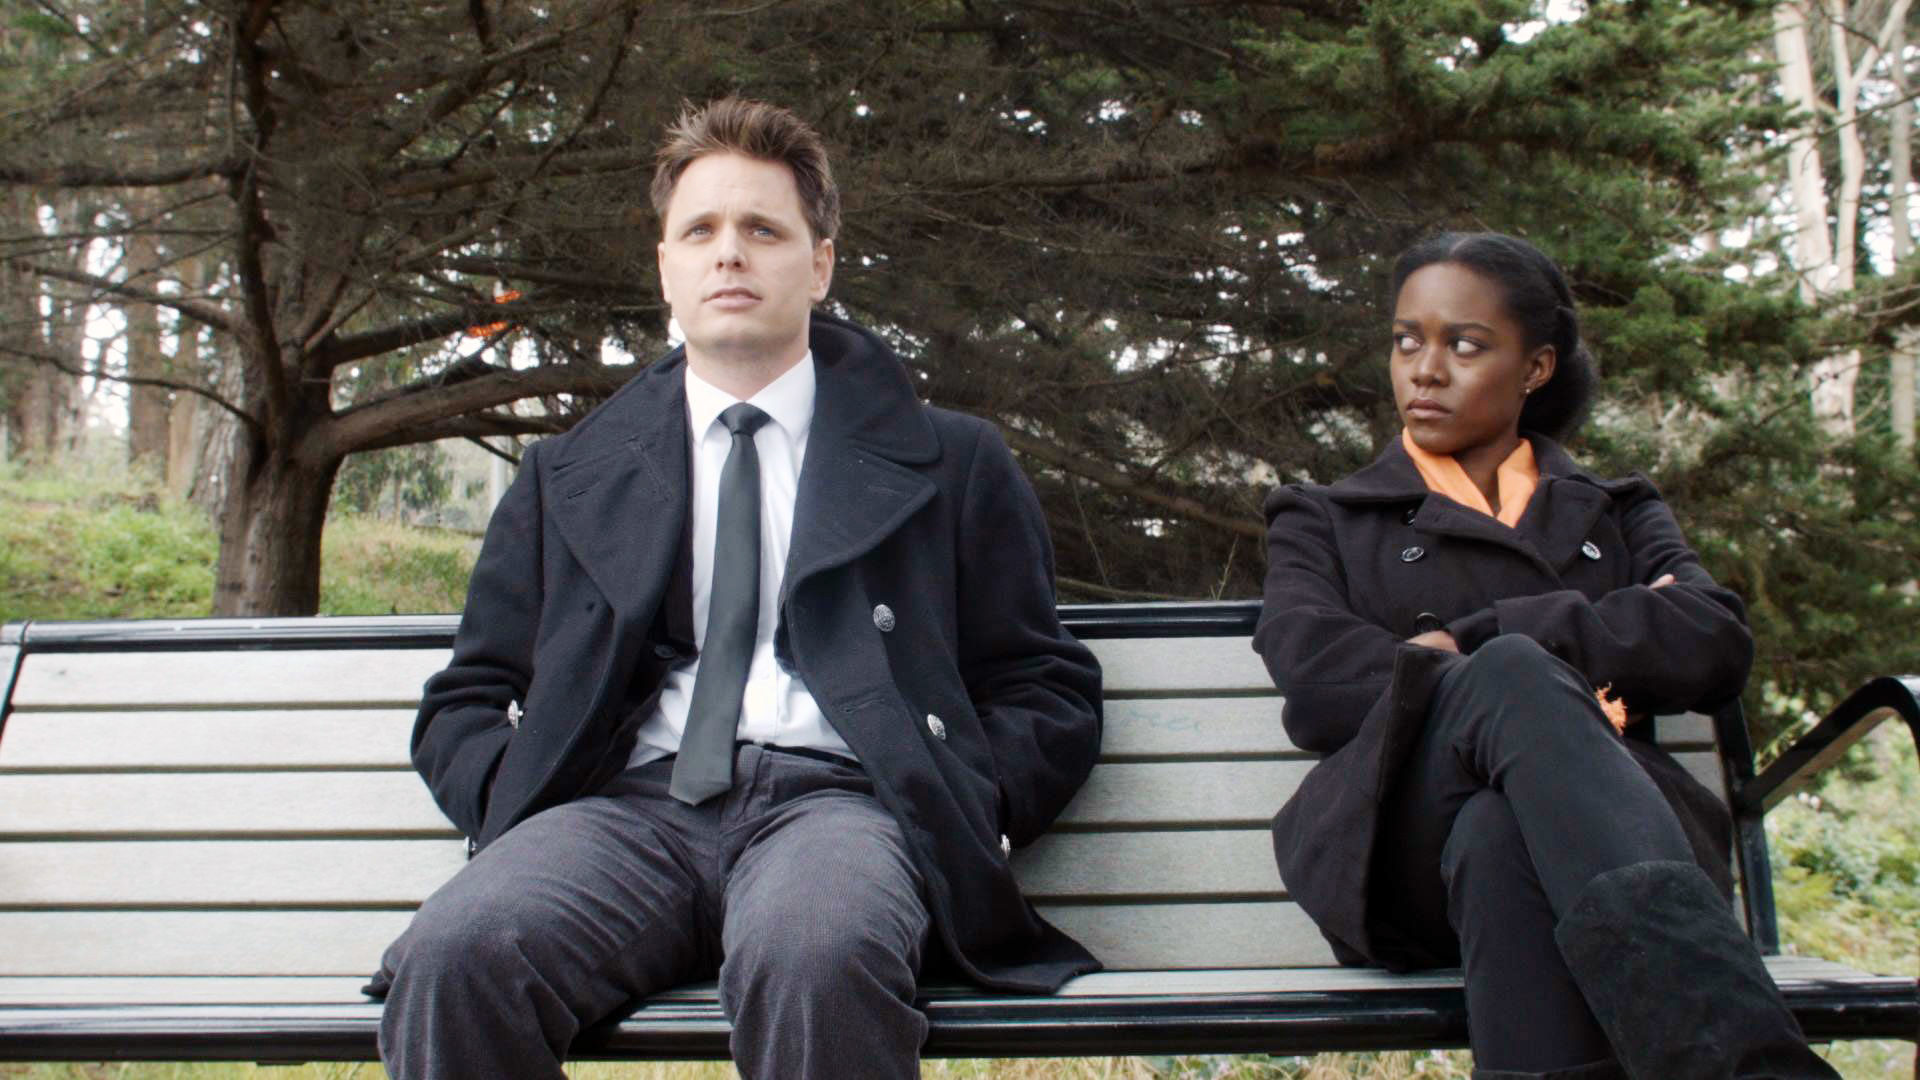 A woman looking angrily at a man sitting next to her on a bench